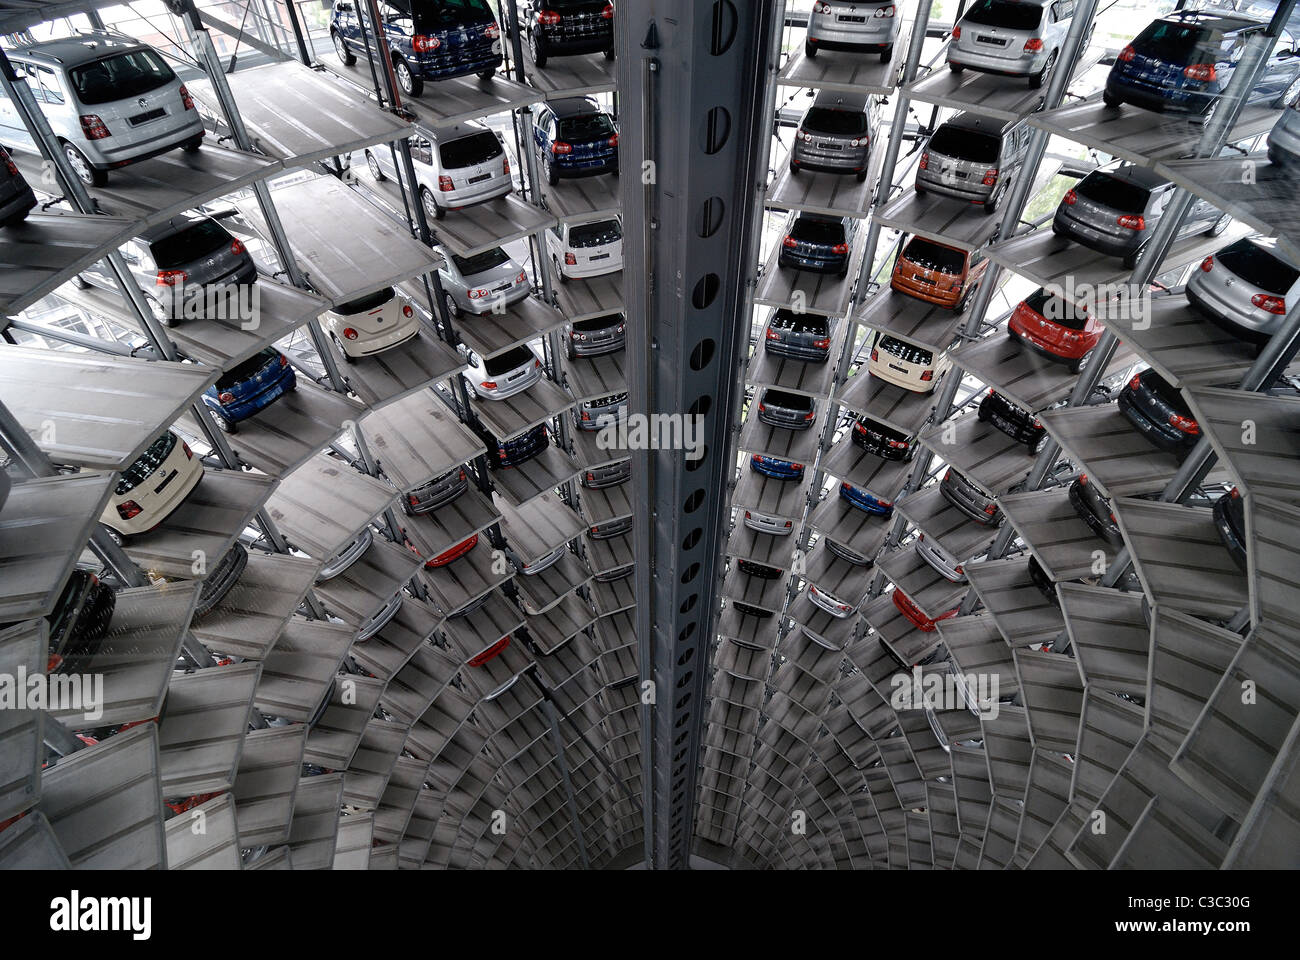 Car Park Multistory High Resolution Stock Photography and Images - Alamy